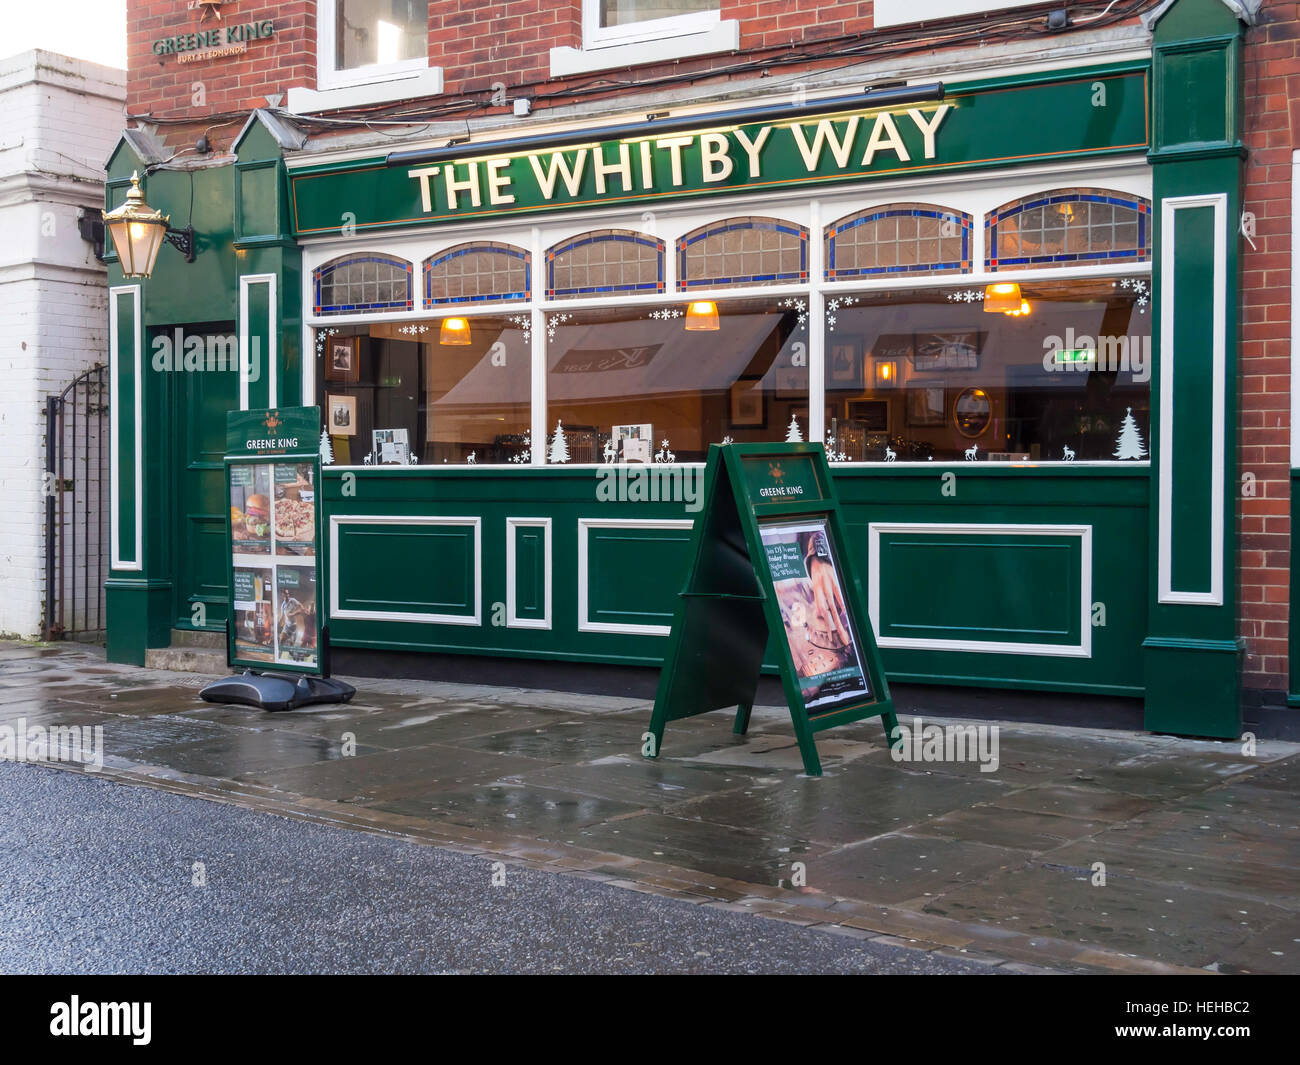 The Whitby Way a new public house opened by Greene King December 2016 Stock Photo